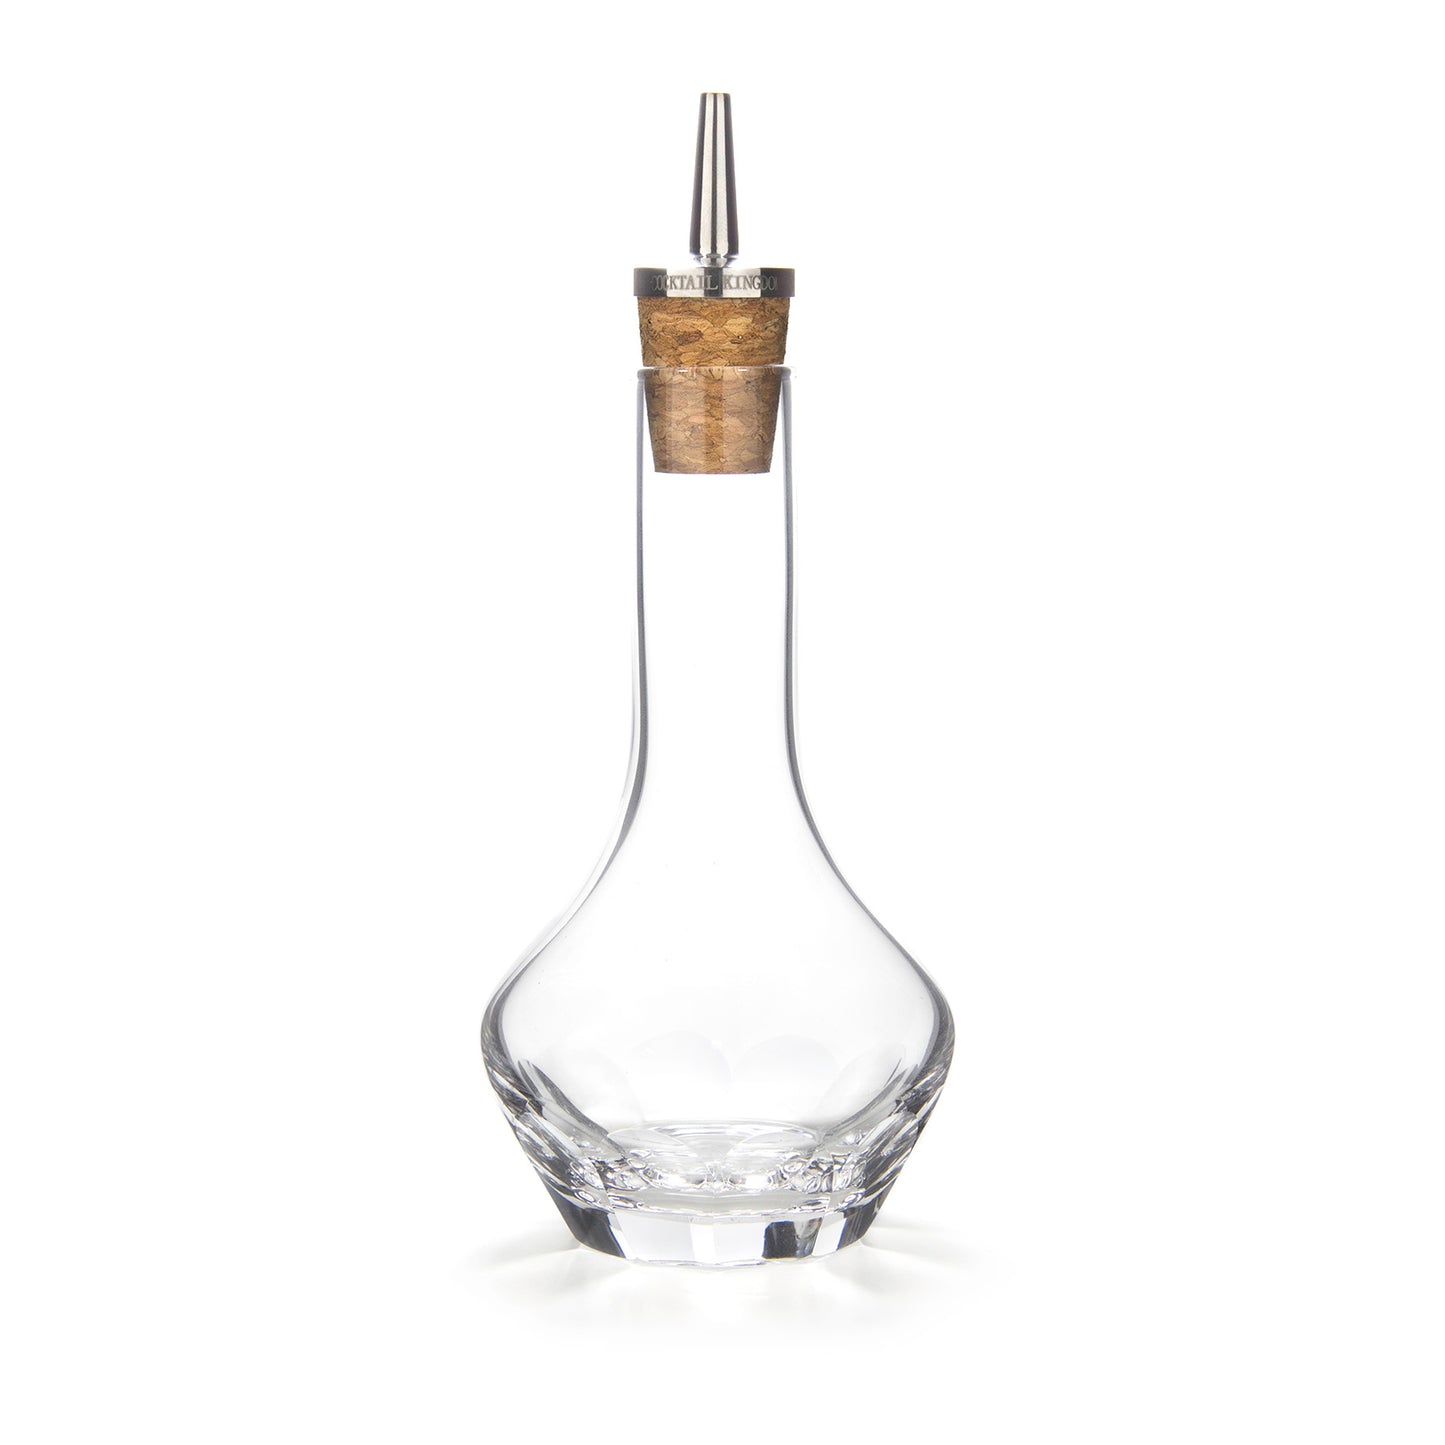 BEVELED BITTERS BOTTLE – STAINLESS STEEL DASHER TOP / 100ml (3.4oz)